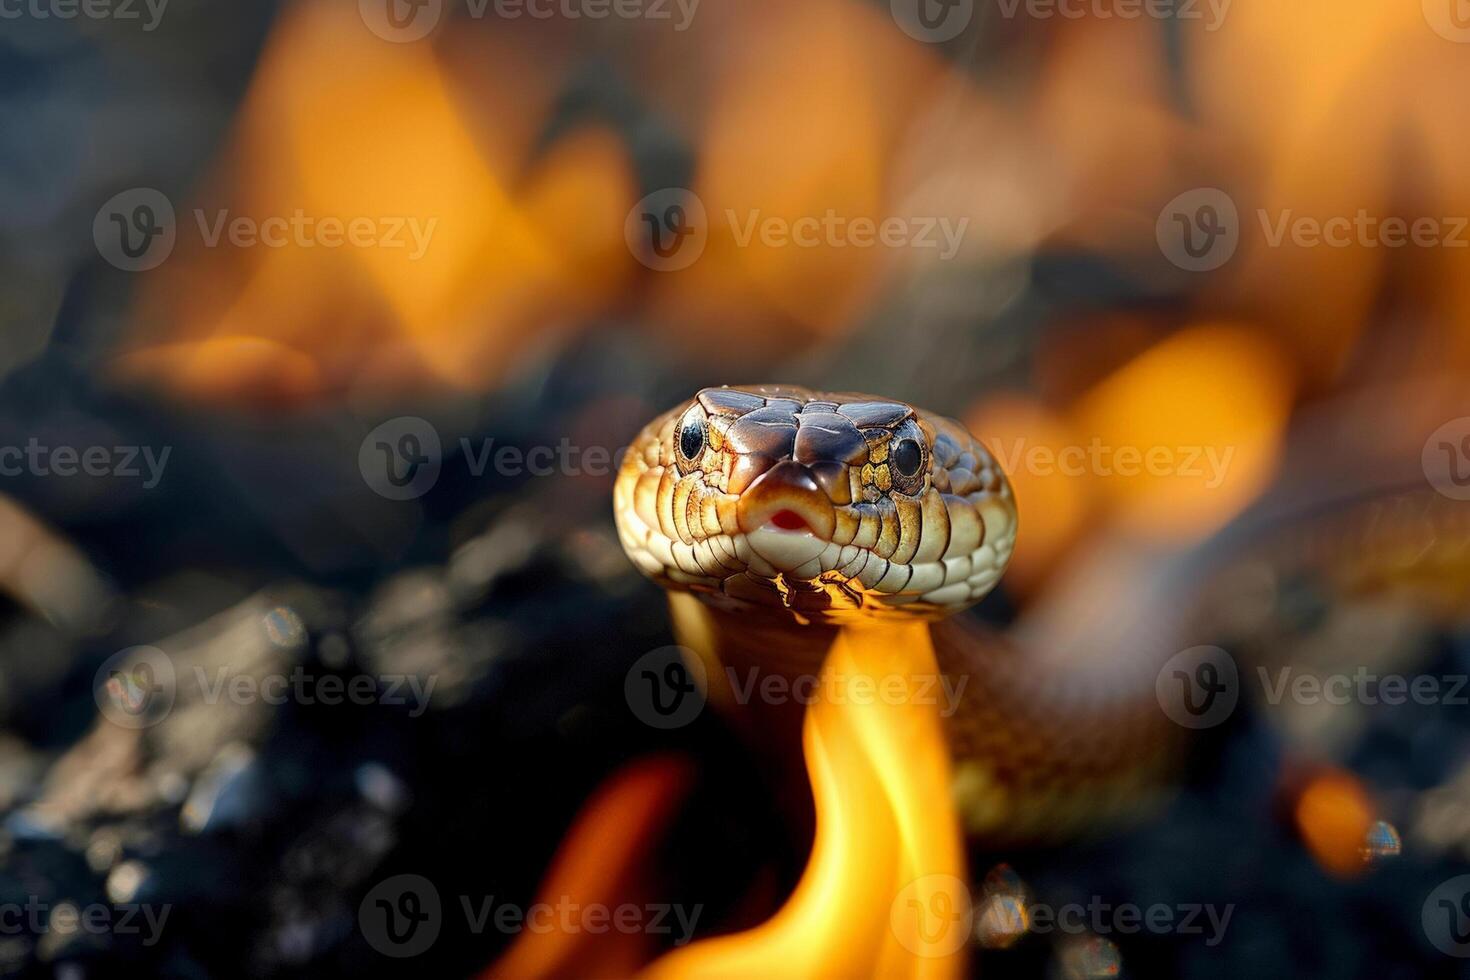 Close up of a snake slithering rapidly away from the fire, survival instinct in harsh conditions photo